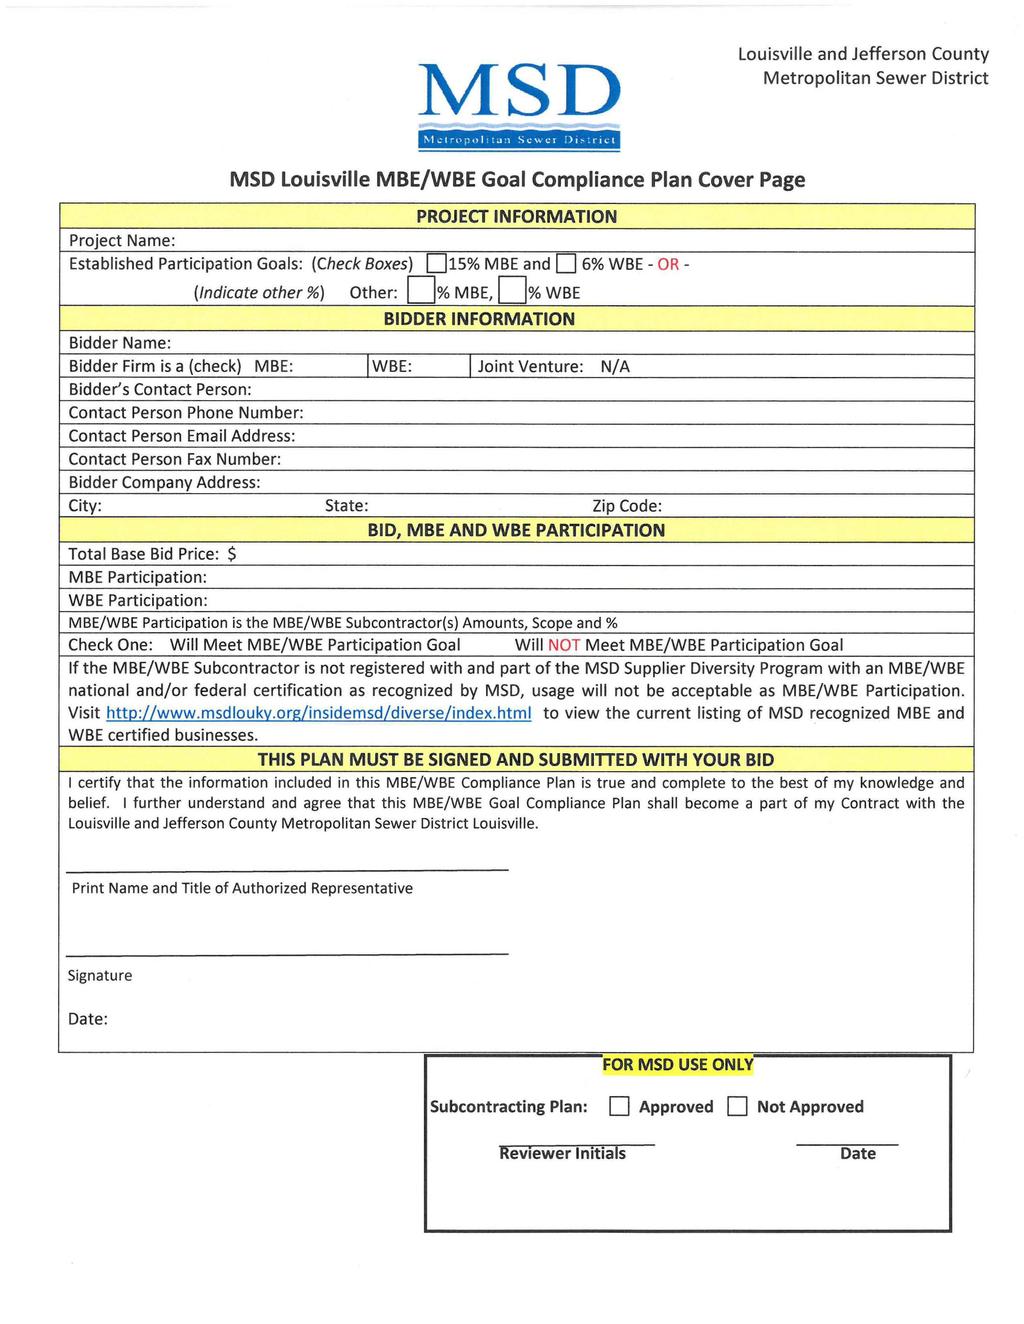 MSD Louisville and Jefferson County Metropolitan Sewer District Project Name: MSD Louisville MBE/WBE Goal Compliance Plan Cover Page ni PROJECT INFORMATION ti Established Participation Goals: (Check